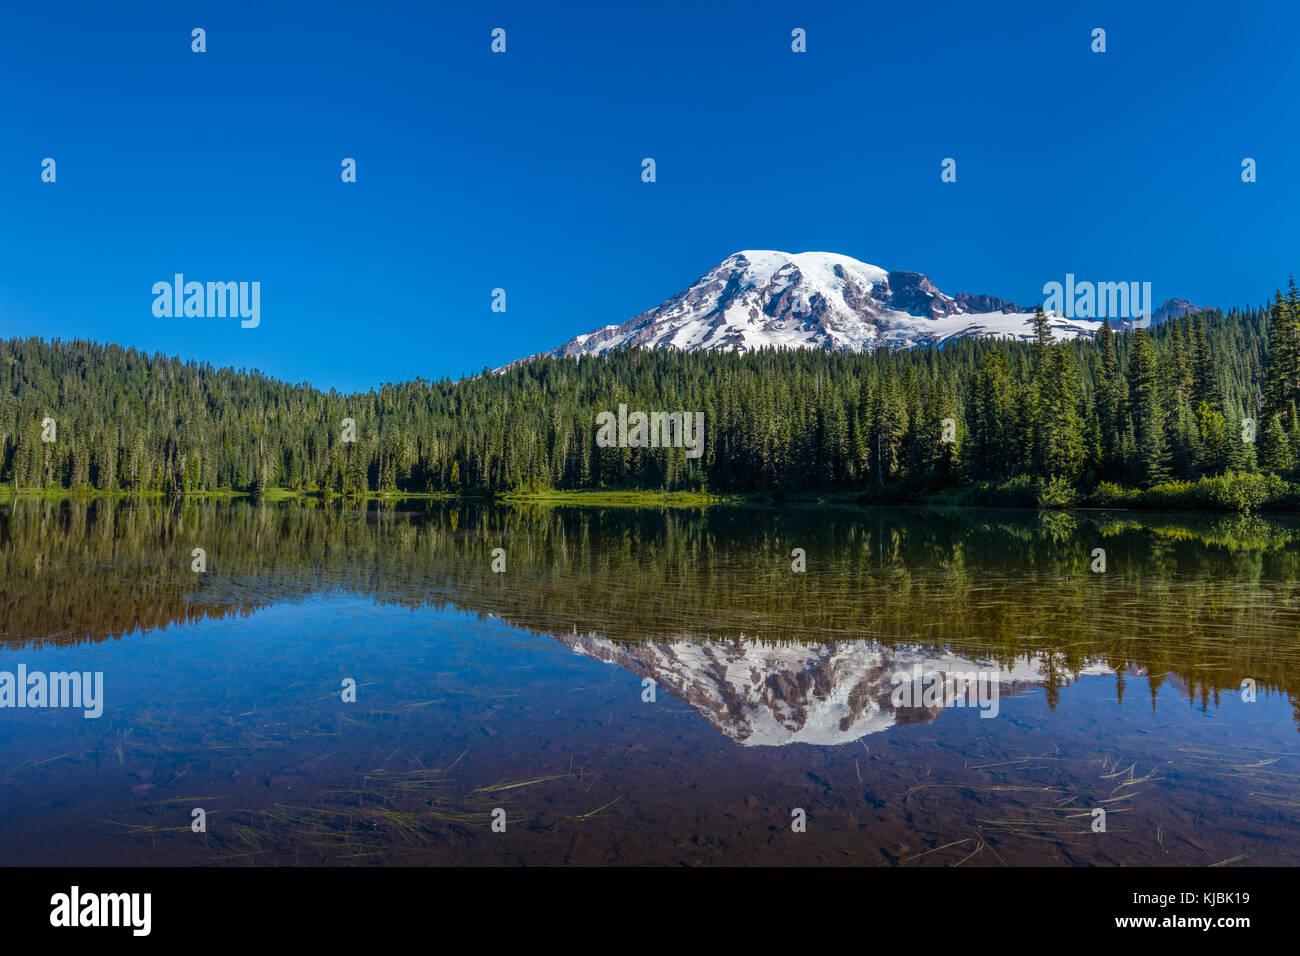 Reflection of Mount Rainier in Reflection Lake on the Stevens Canyon Road in Mount Rainier National Park in Washington State in the United States Stock Photo